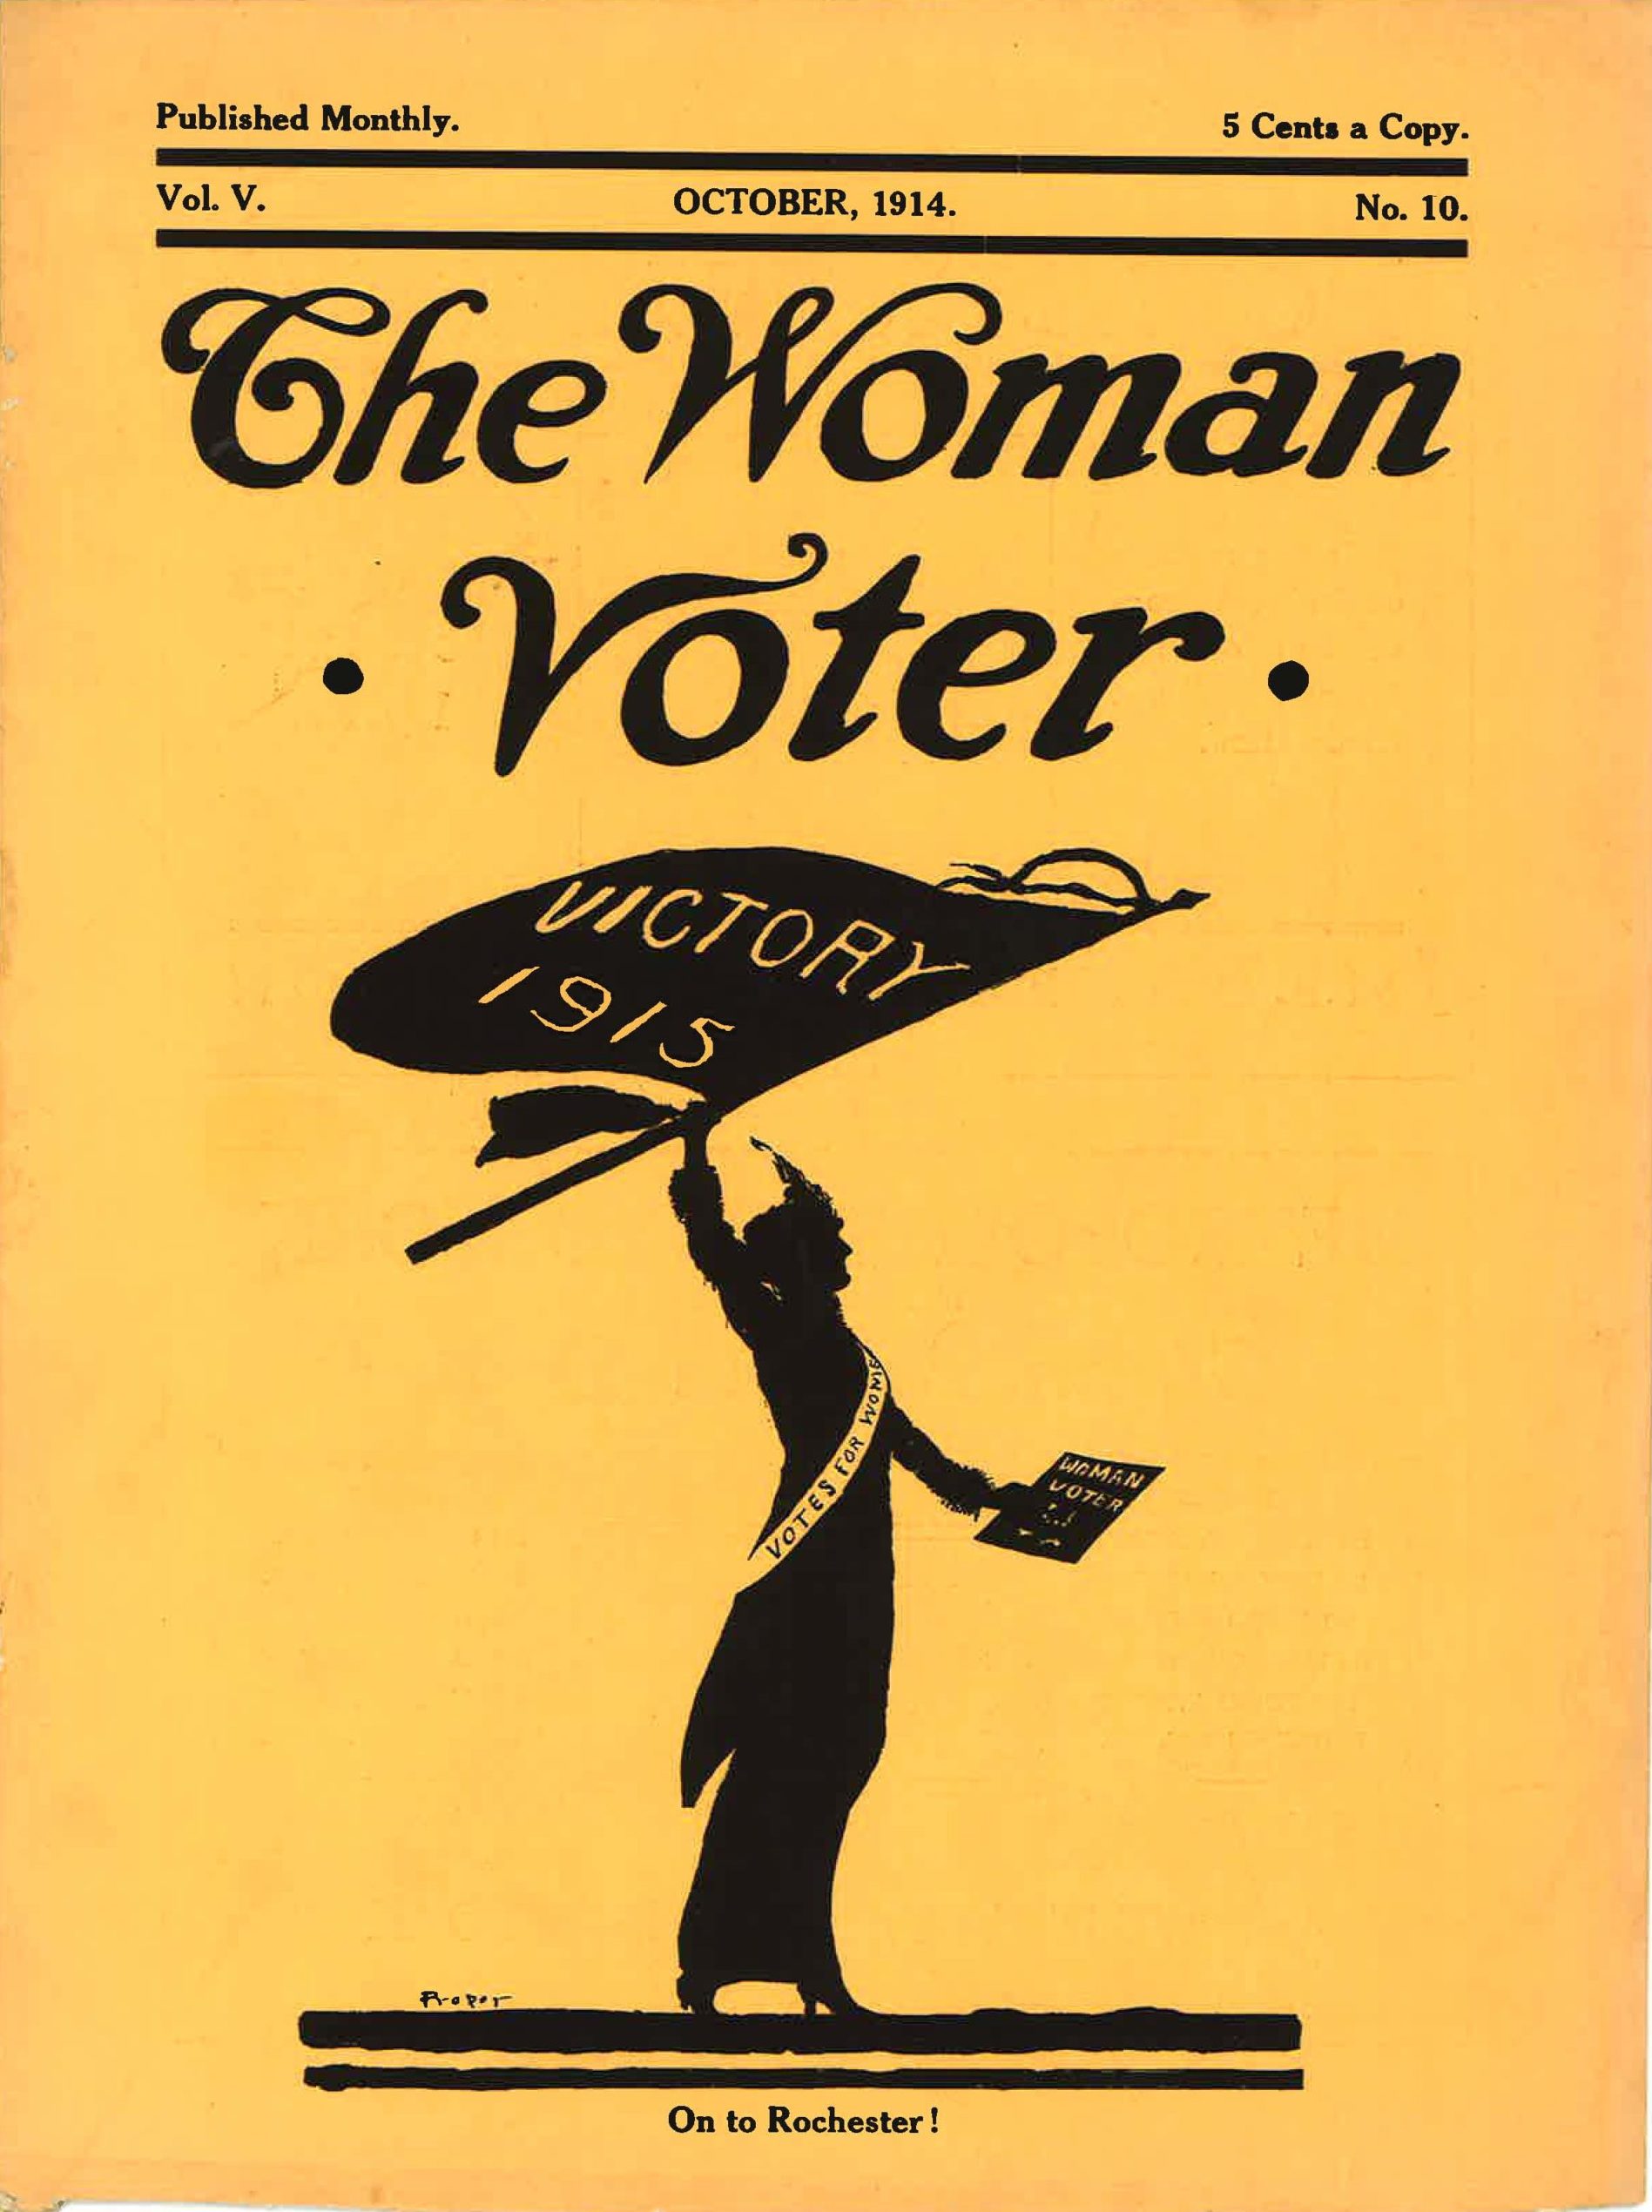 The Woman Voter publication cover